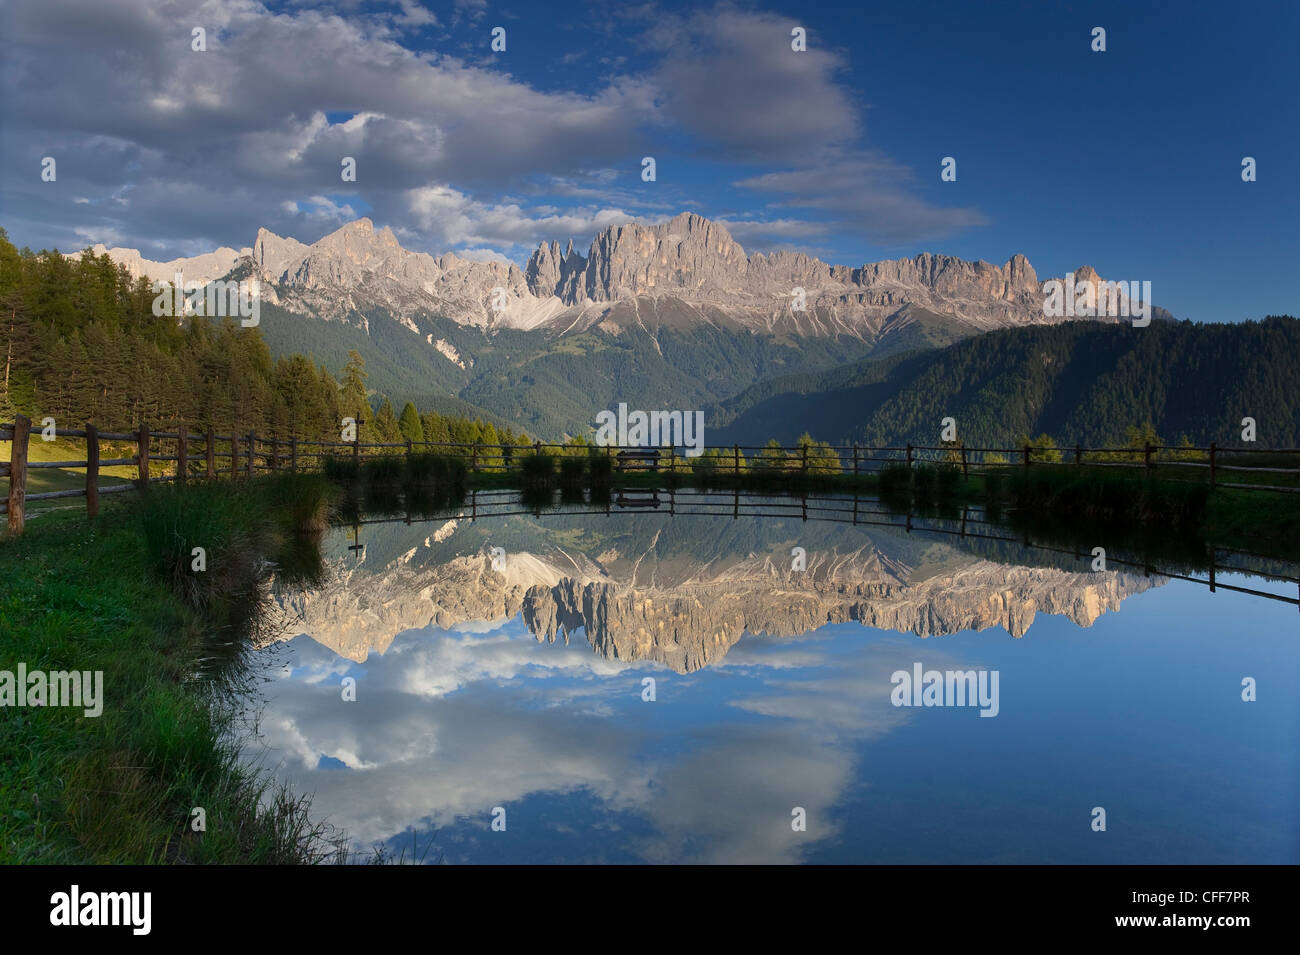 Wuhn Weiher, Tierser Valley, Eisack Valley, Alto Adige, South Tyrol, Italy Stock Photo